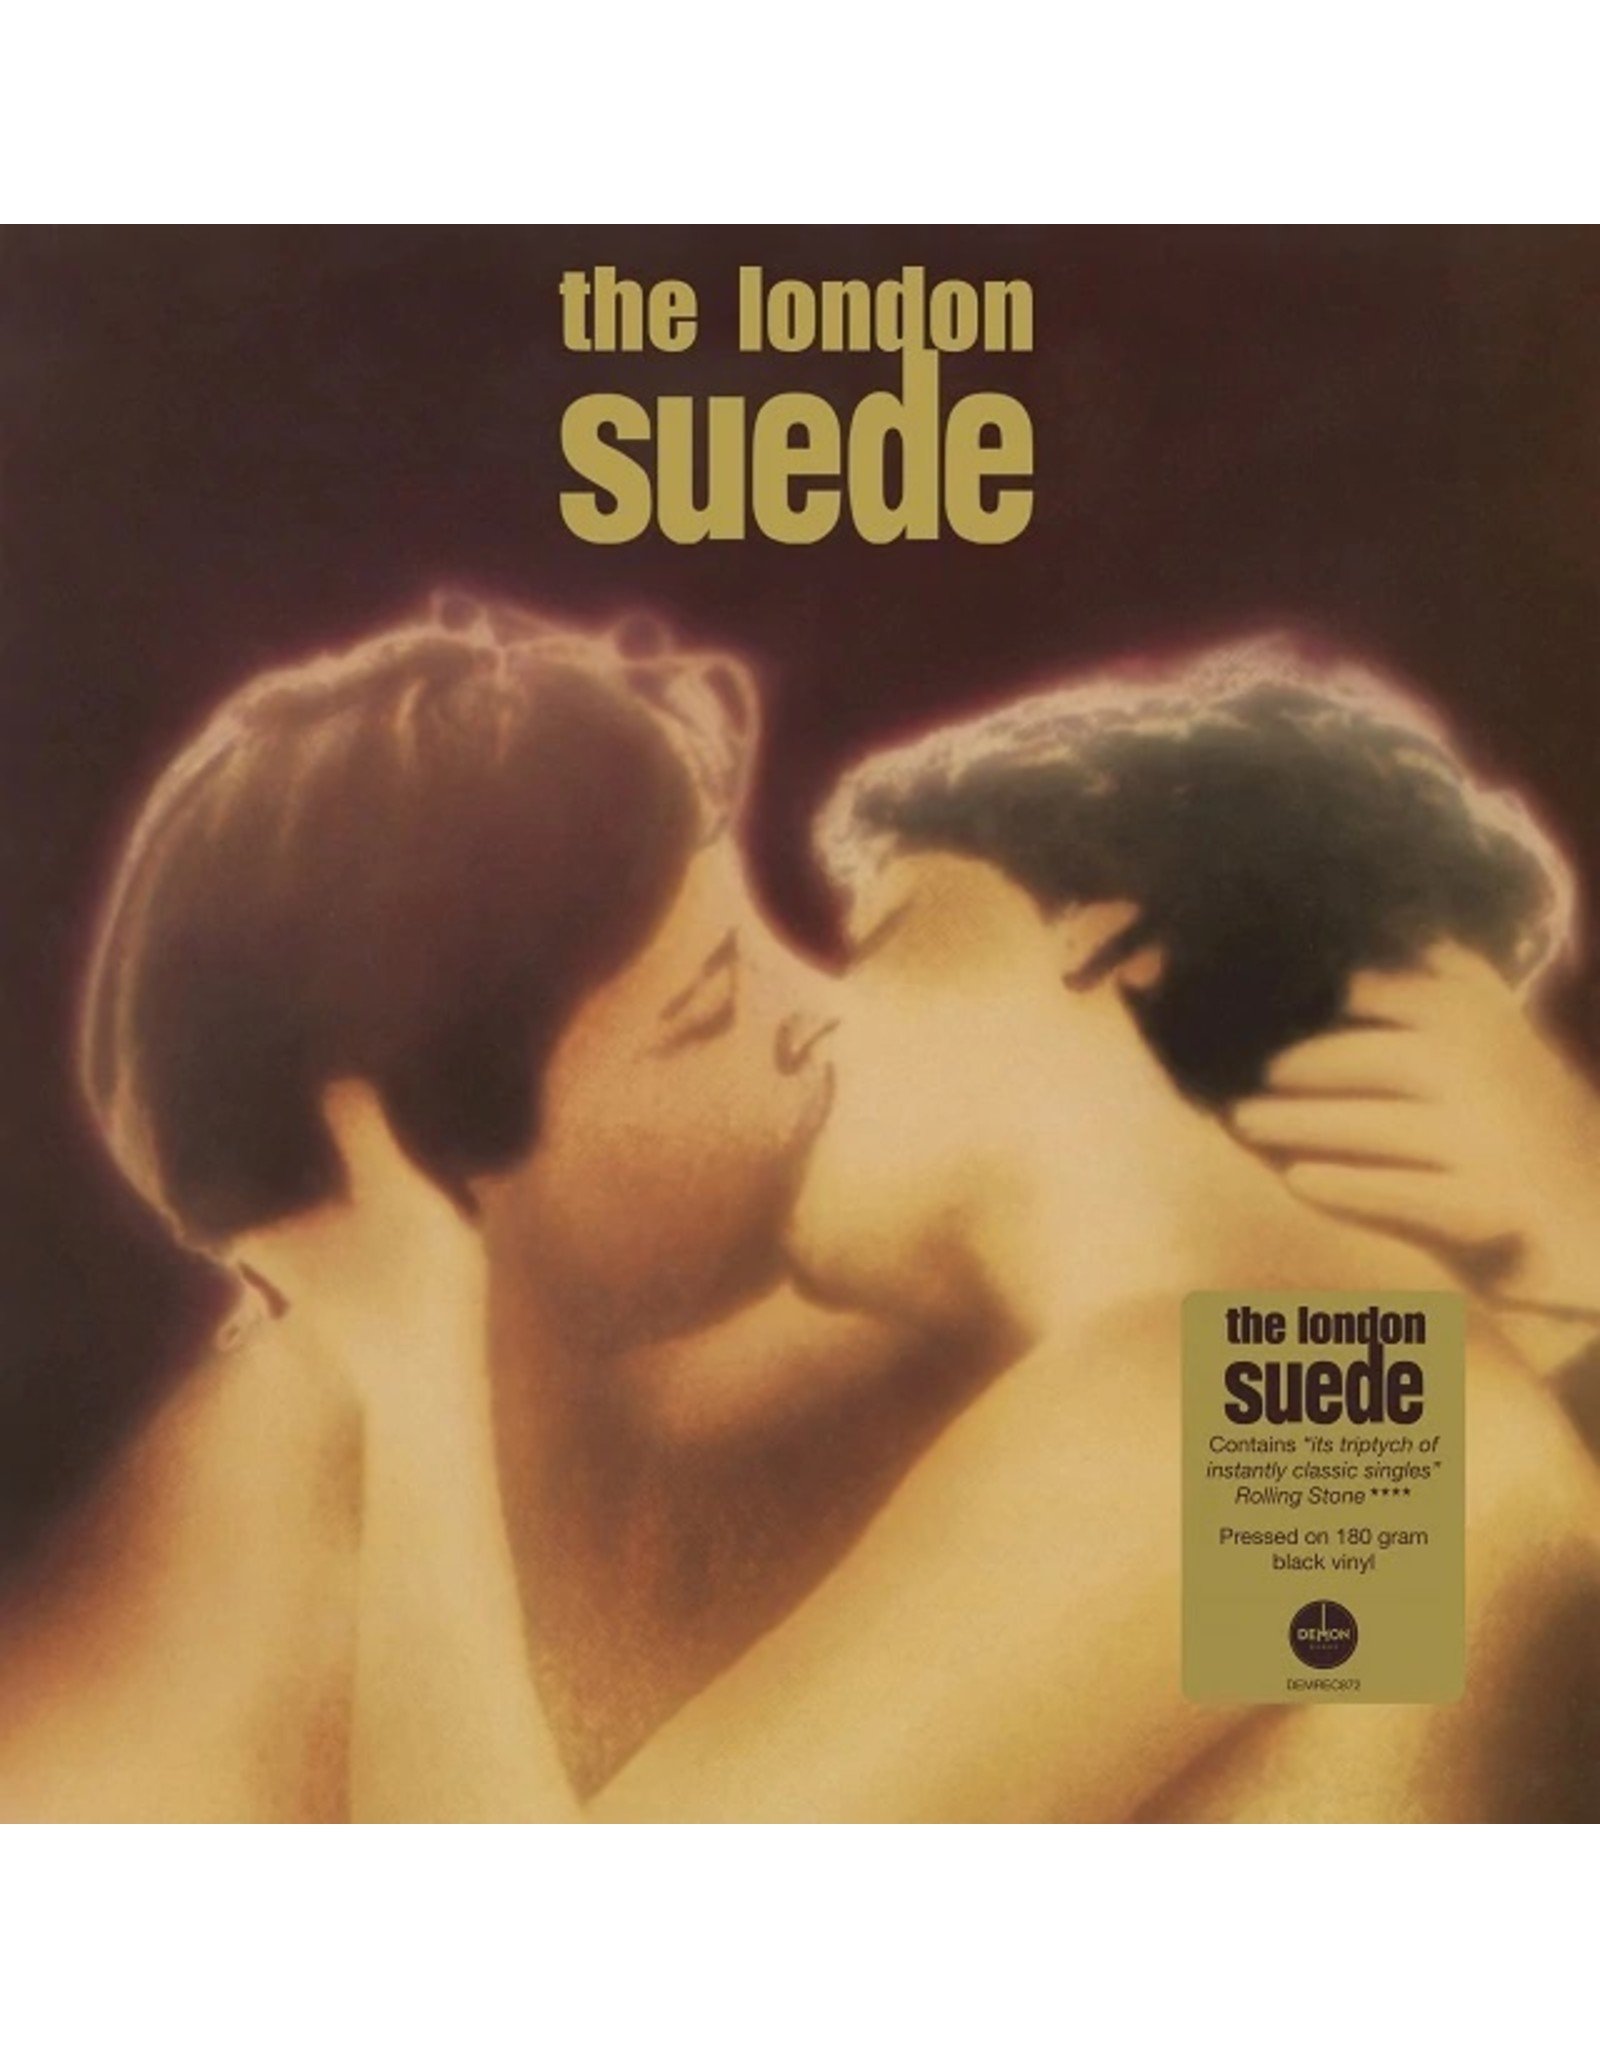 London Suede - The London Suede